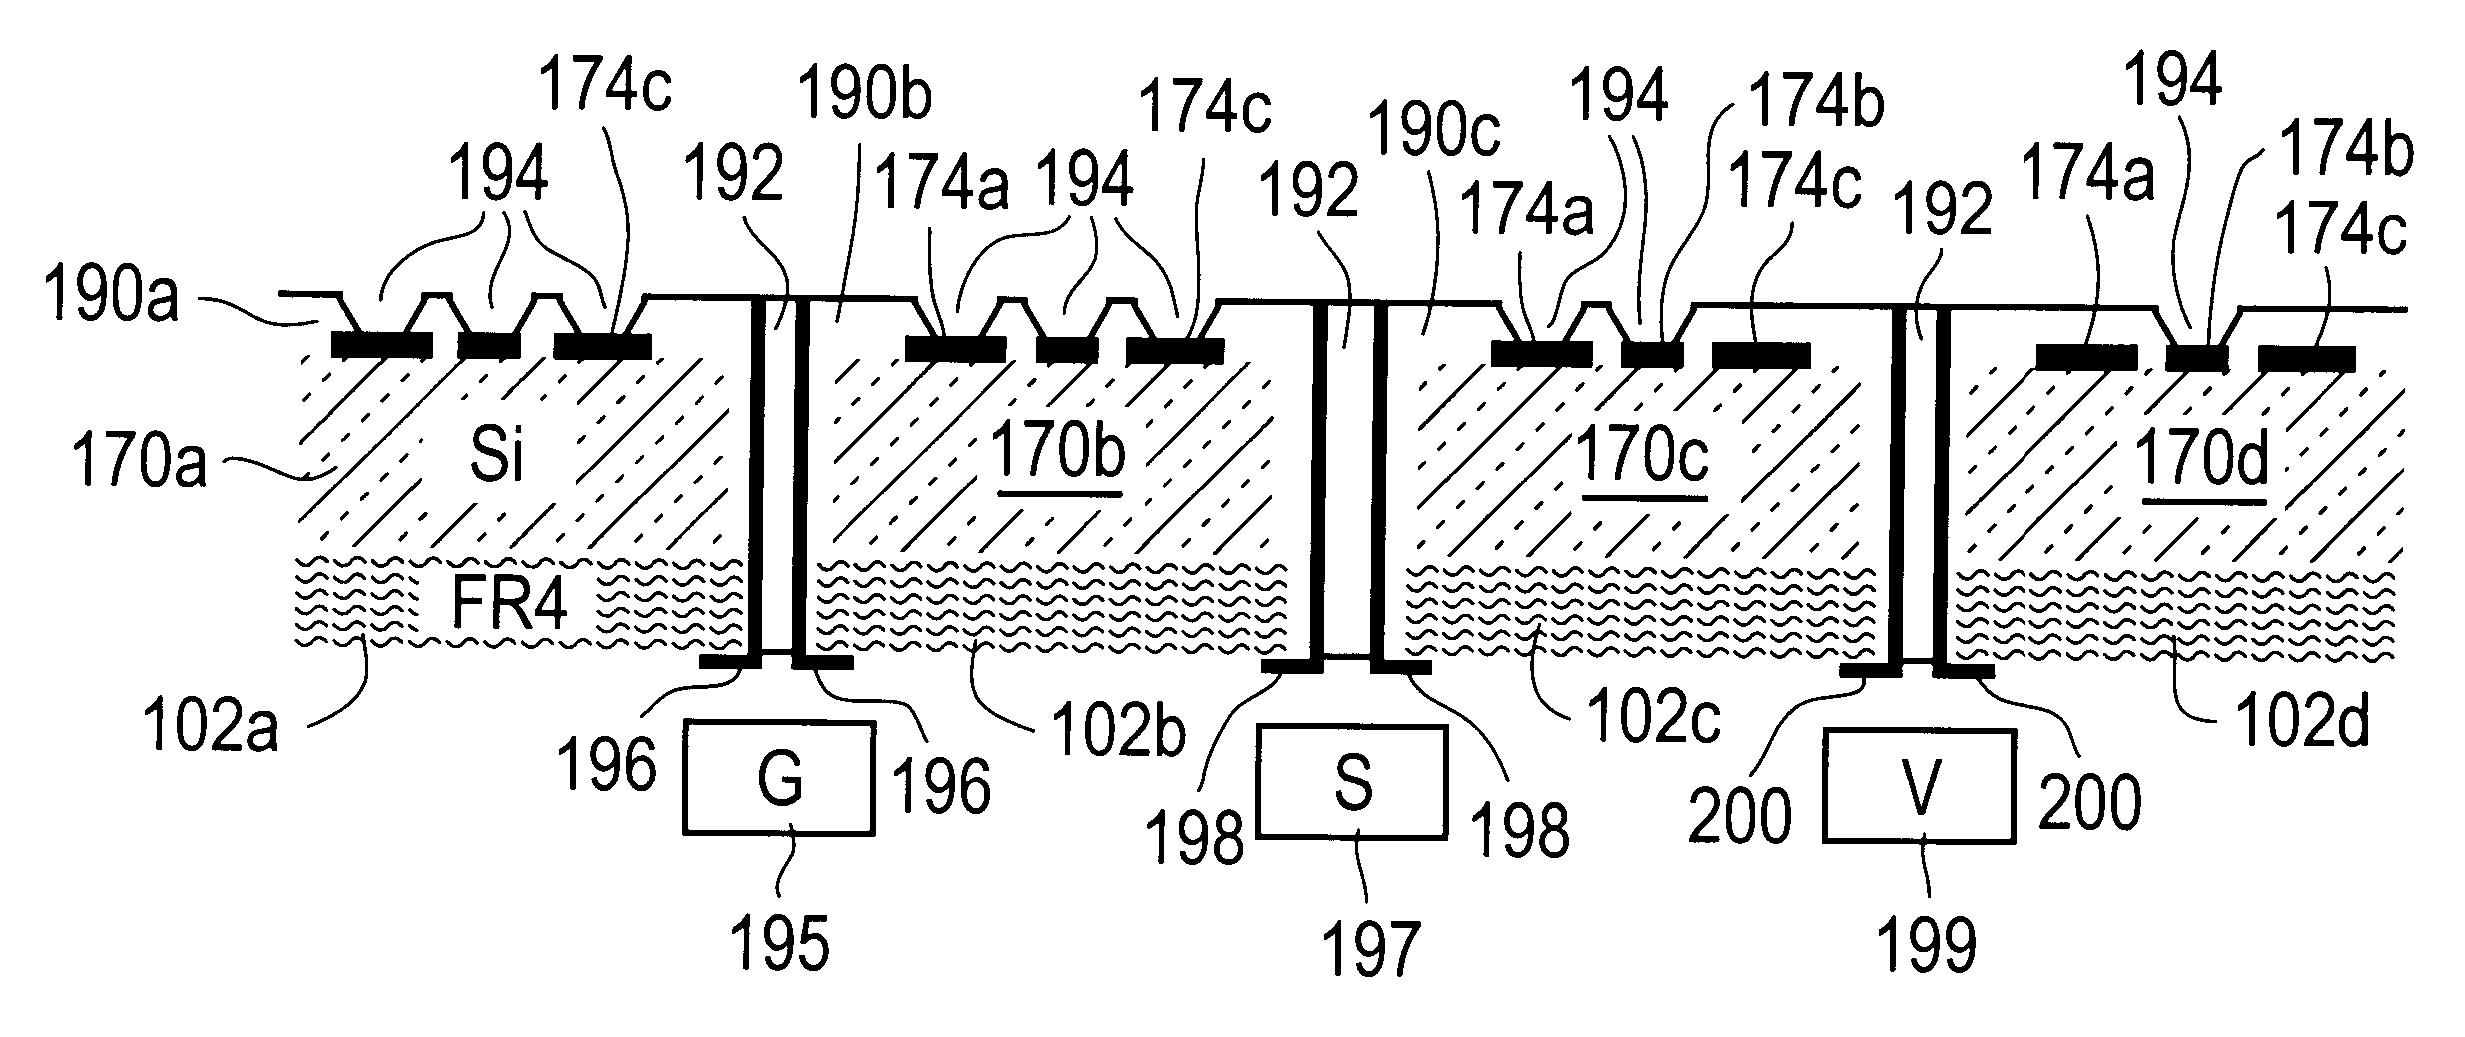 Composite interposer and method for producing a composite interposer